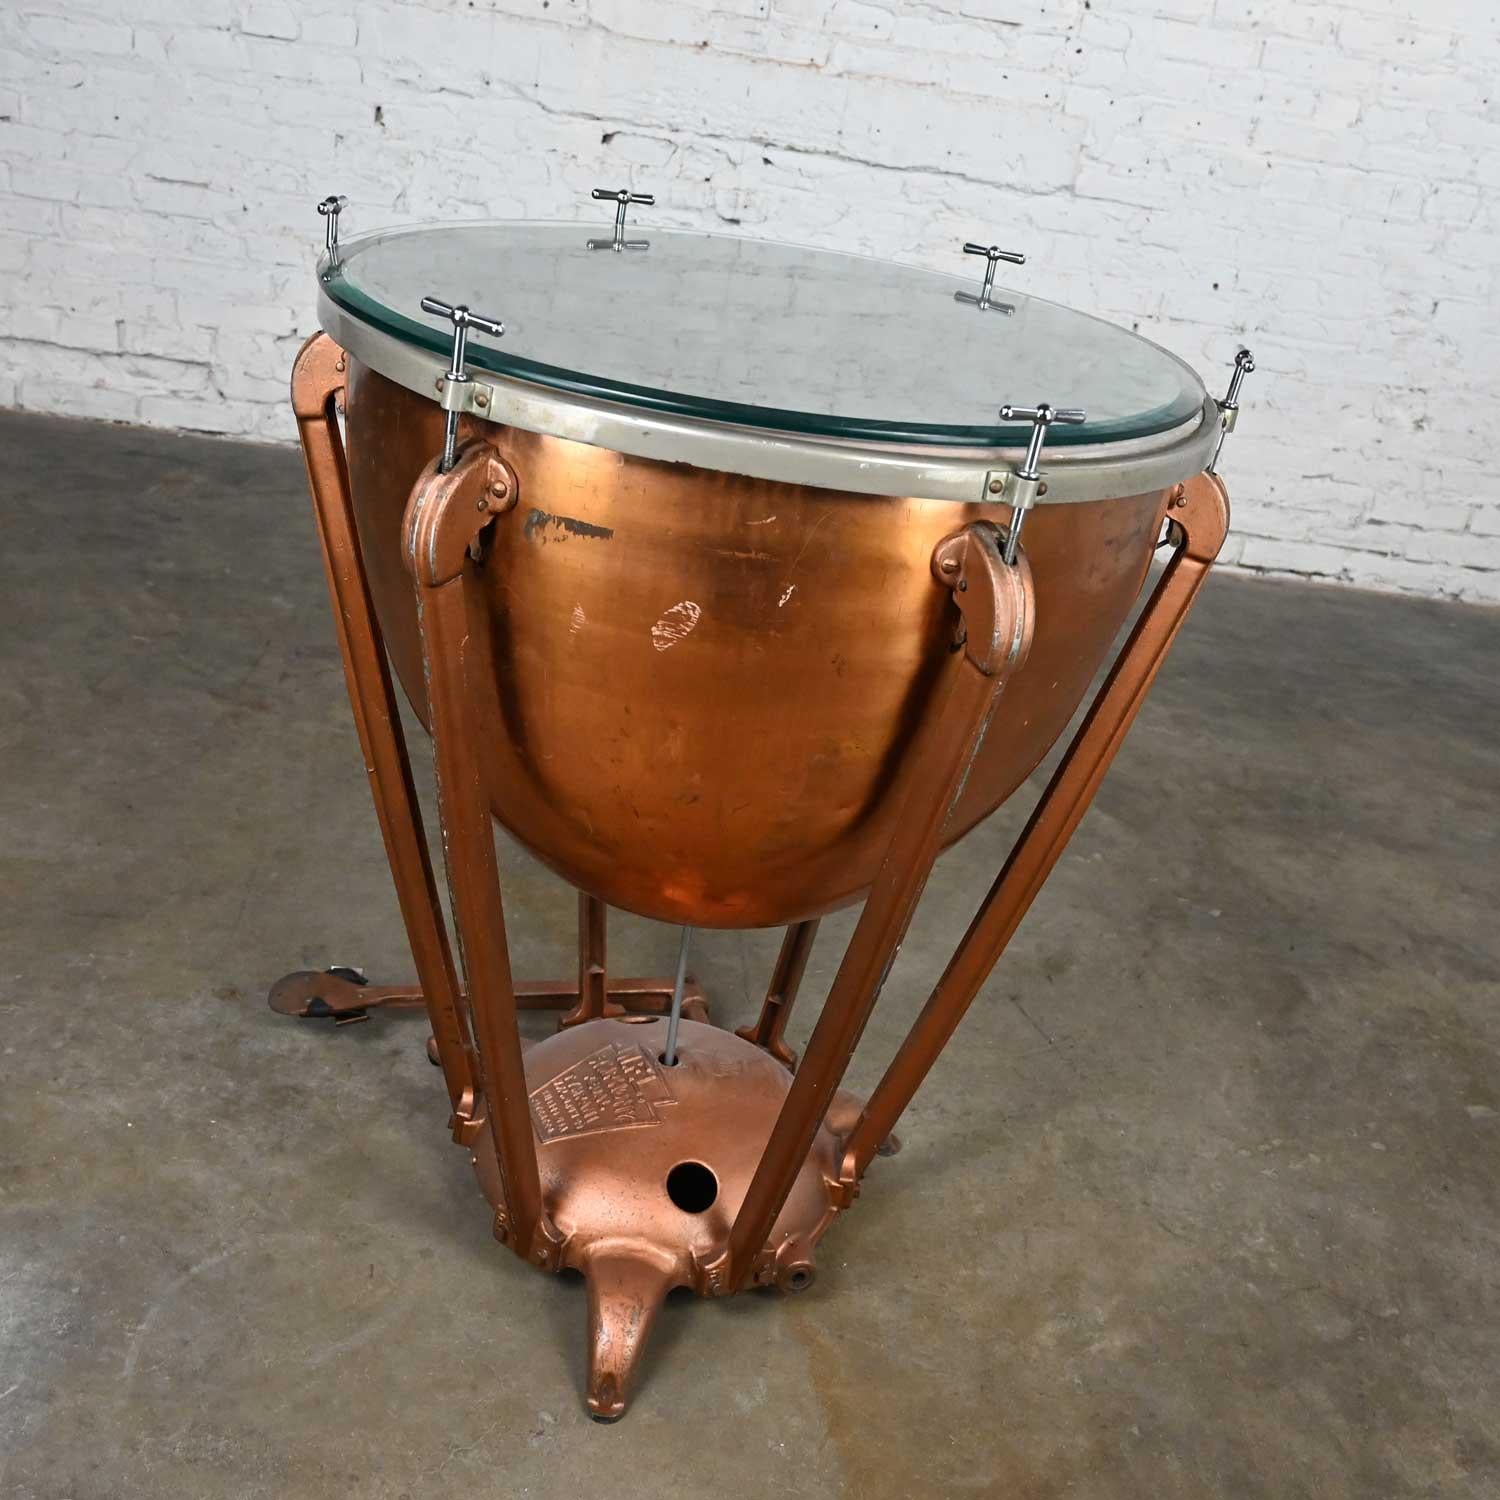 Steampunk Industrial Copper Timpani Kettle Drum Center Table by WFL Drum Co  In Good Condition For Sale In Topeka, KS